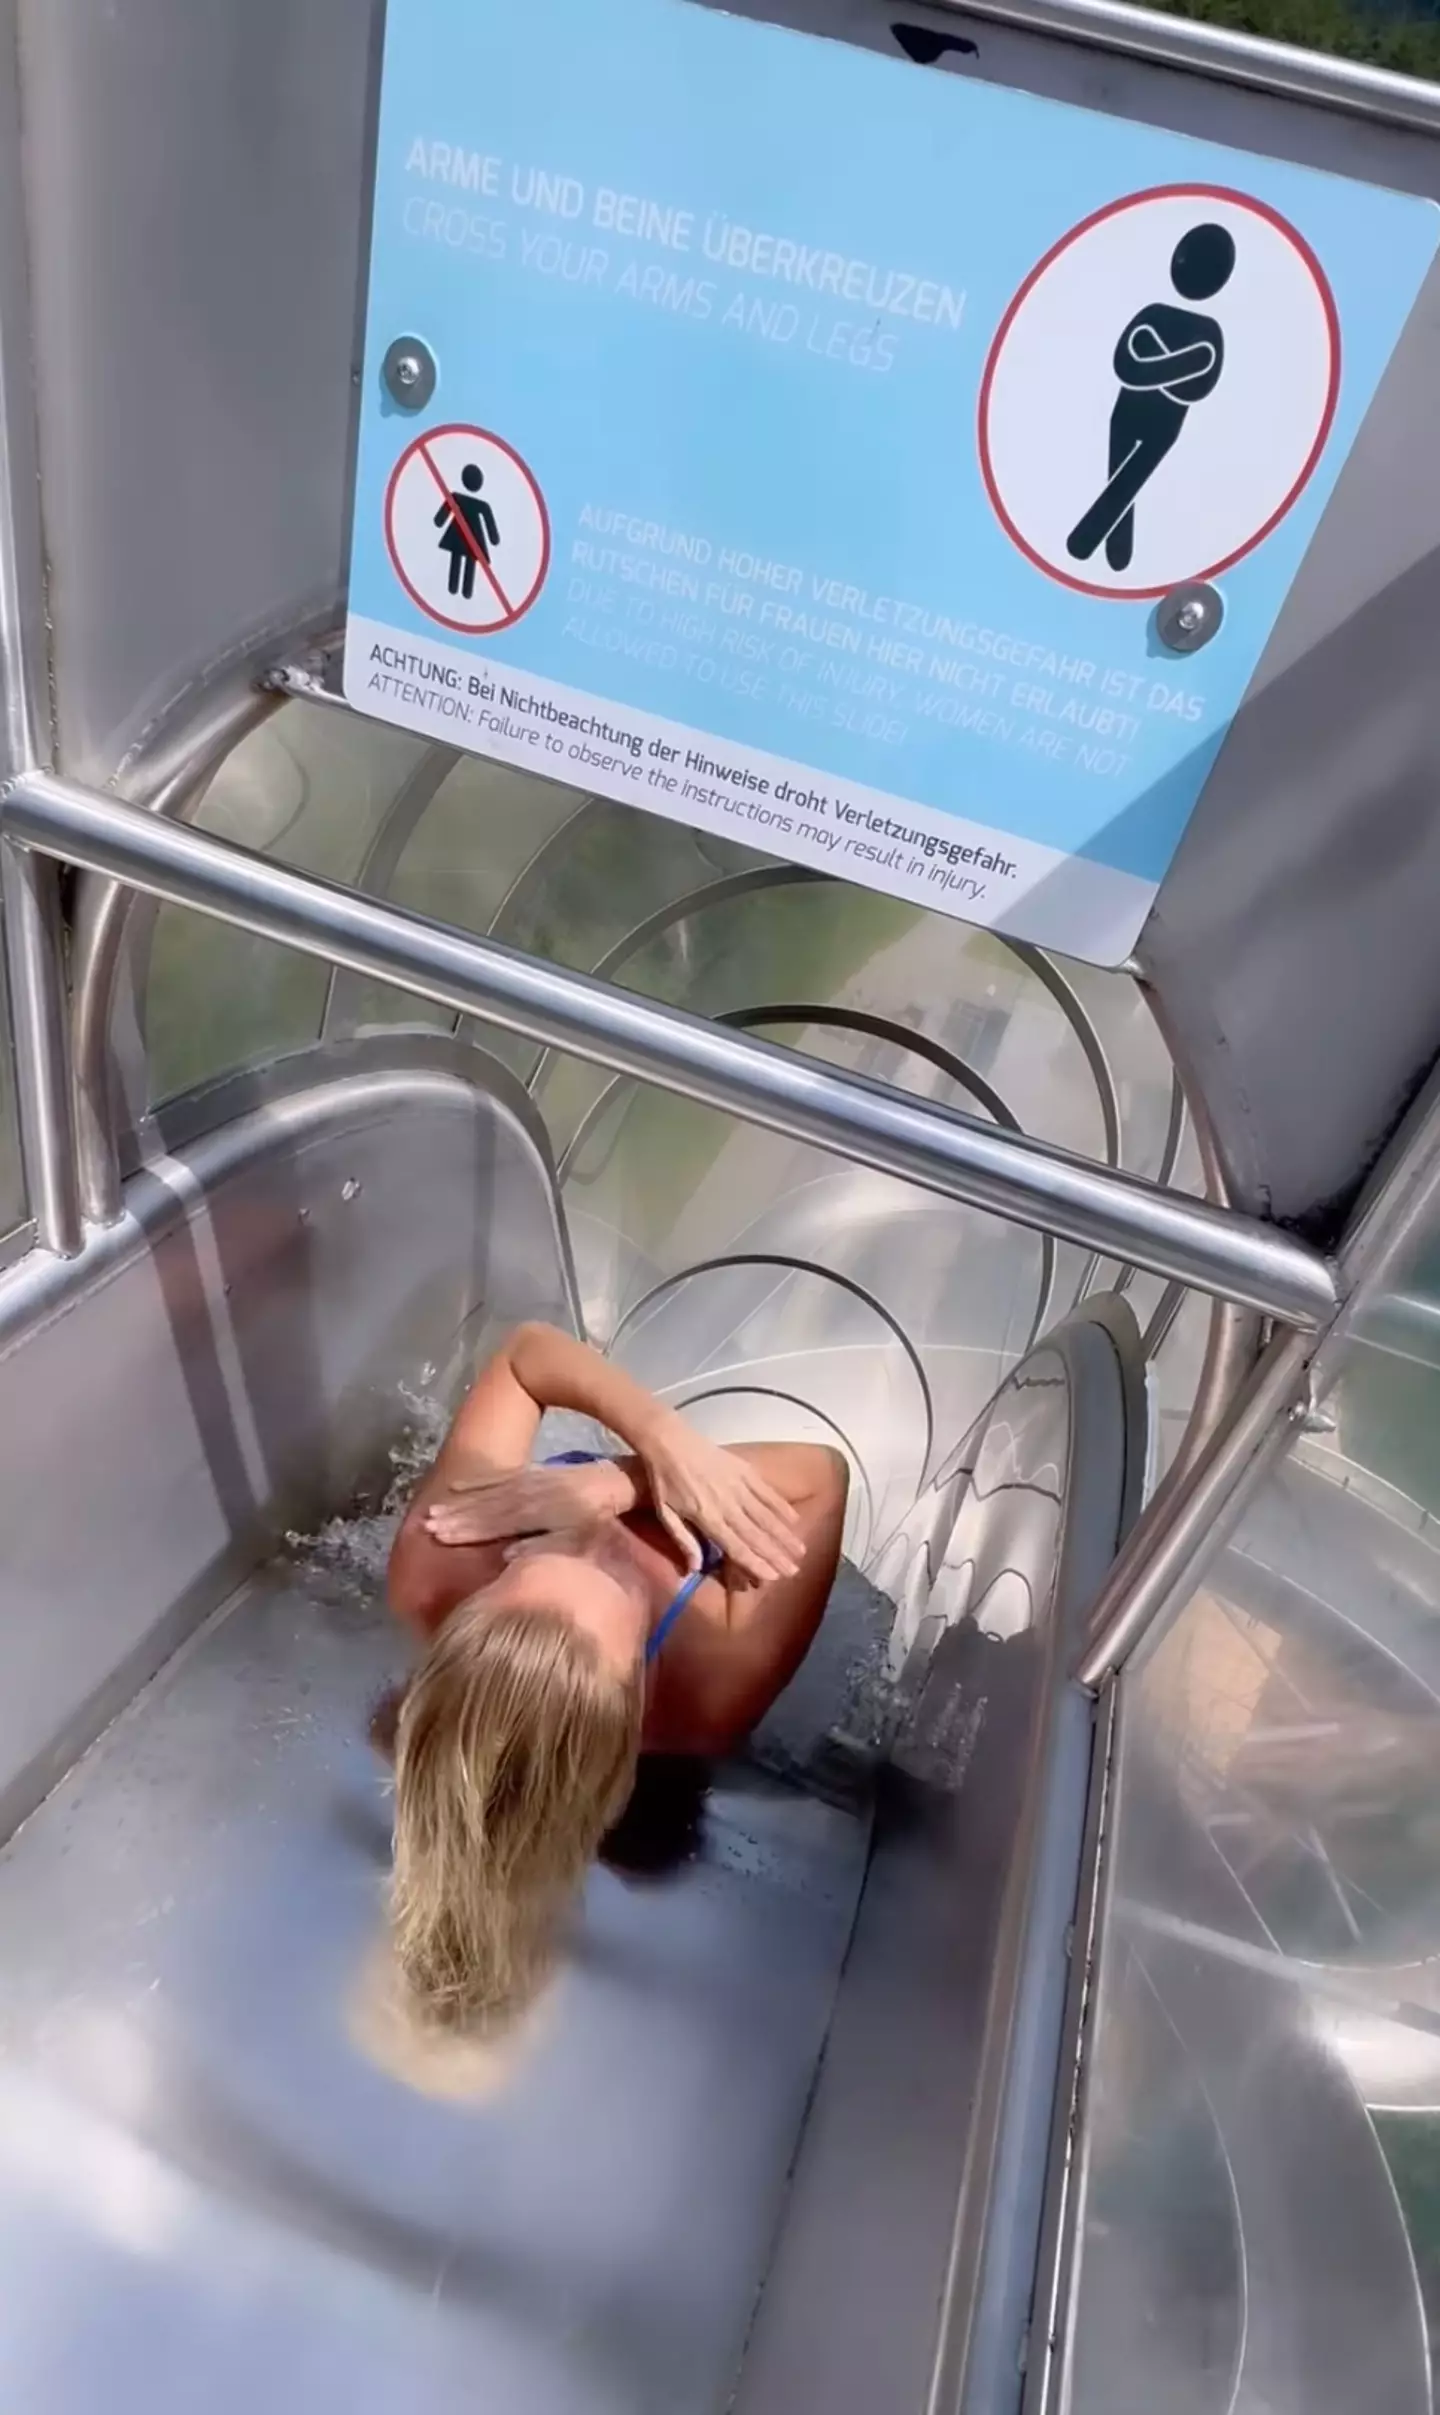 The world champion diver went down the slide despite warnings that it's not suitable for women (Instagram/@rhiannan_iffland)